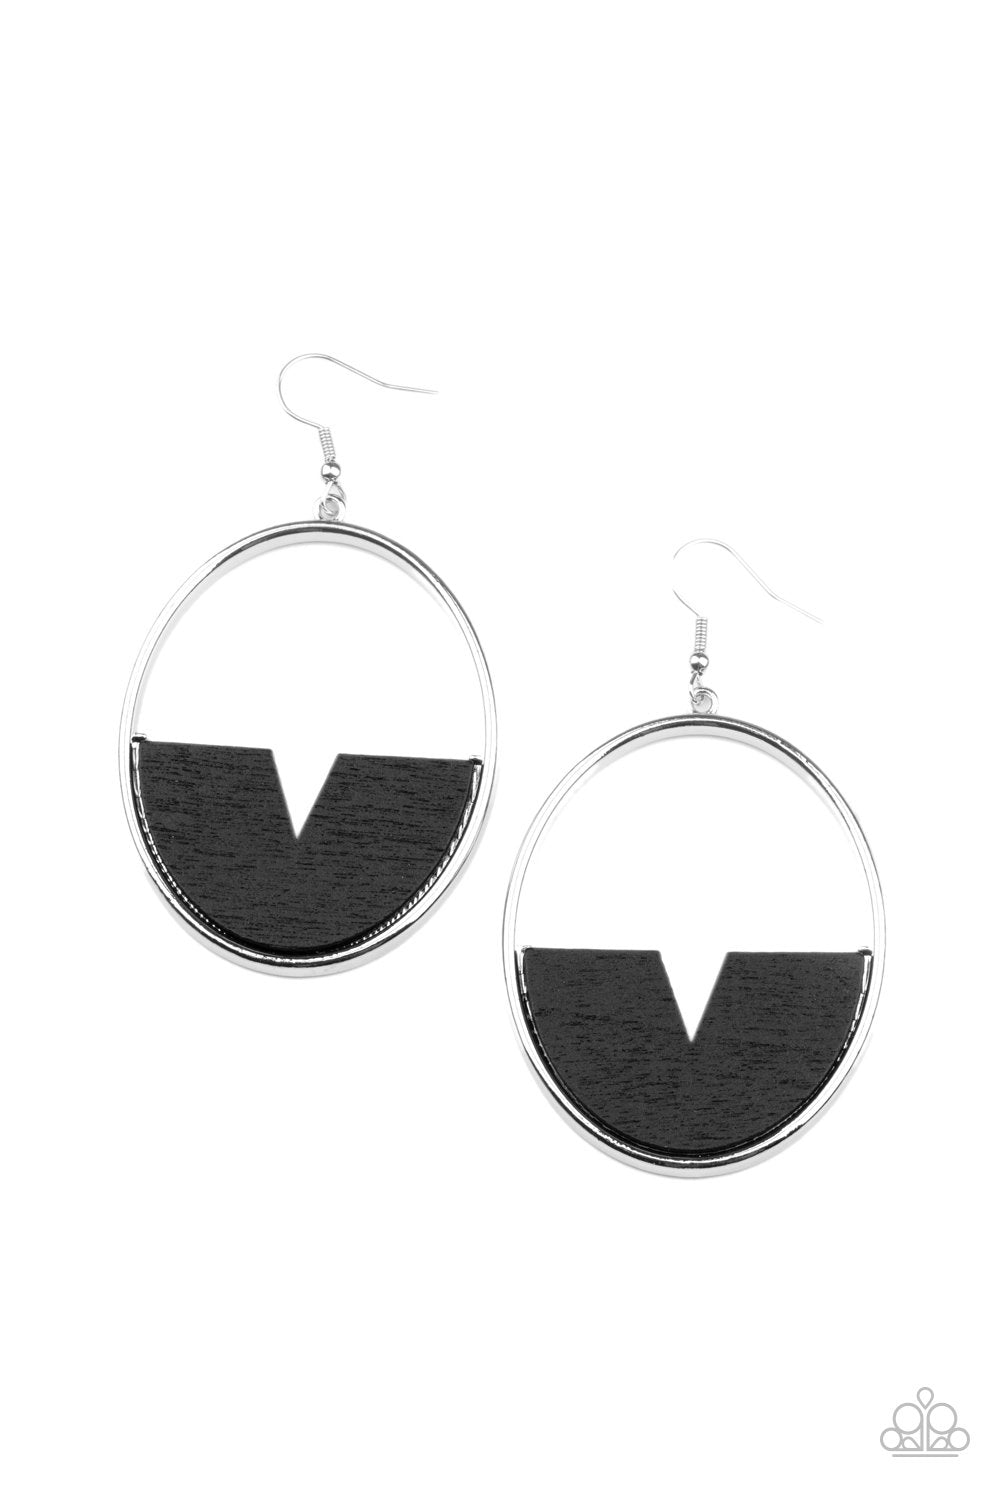 Island Breeze Black Wood and Silver Earrings - Paparazzi Accessories- lightbox - CarasShop.com - $5 Jewelry by Cara Jewels